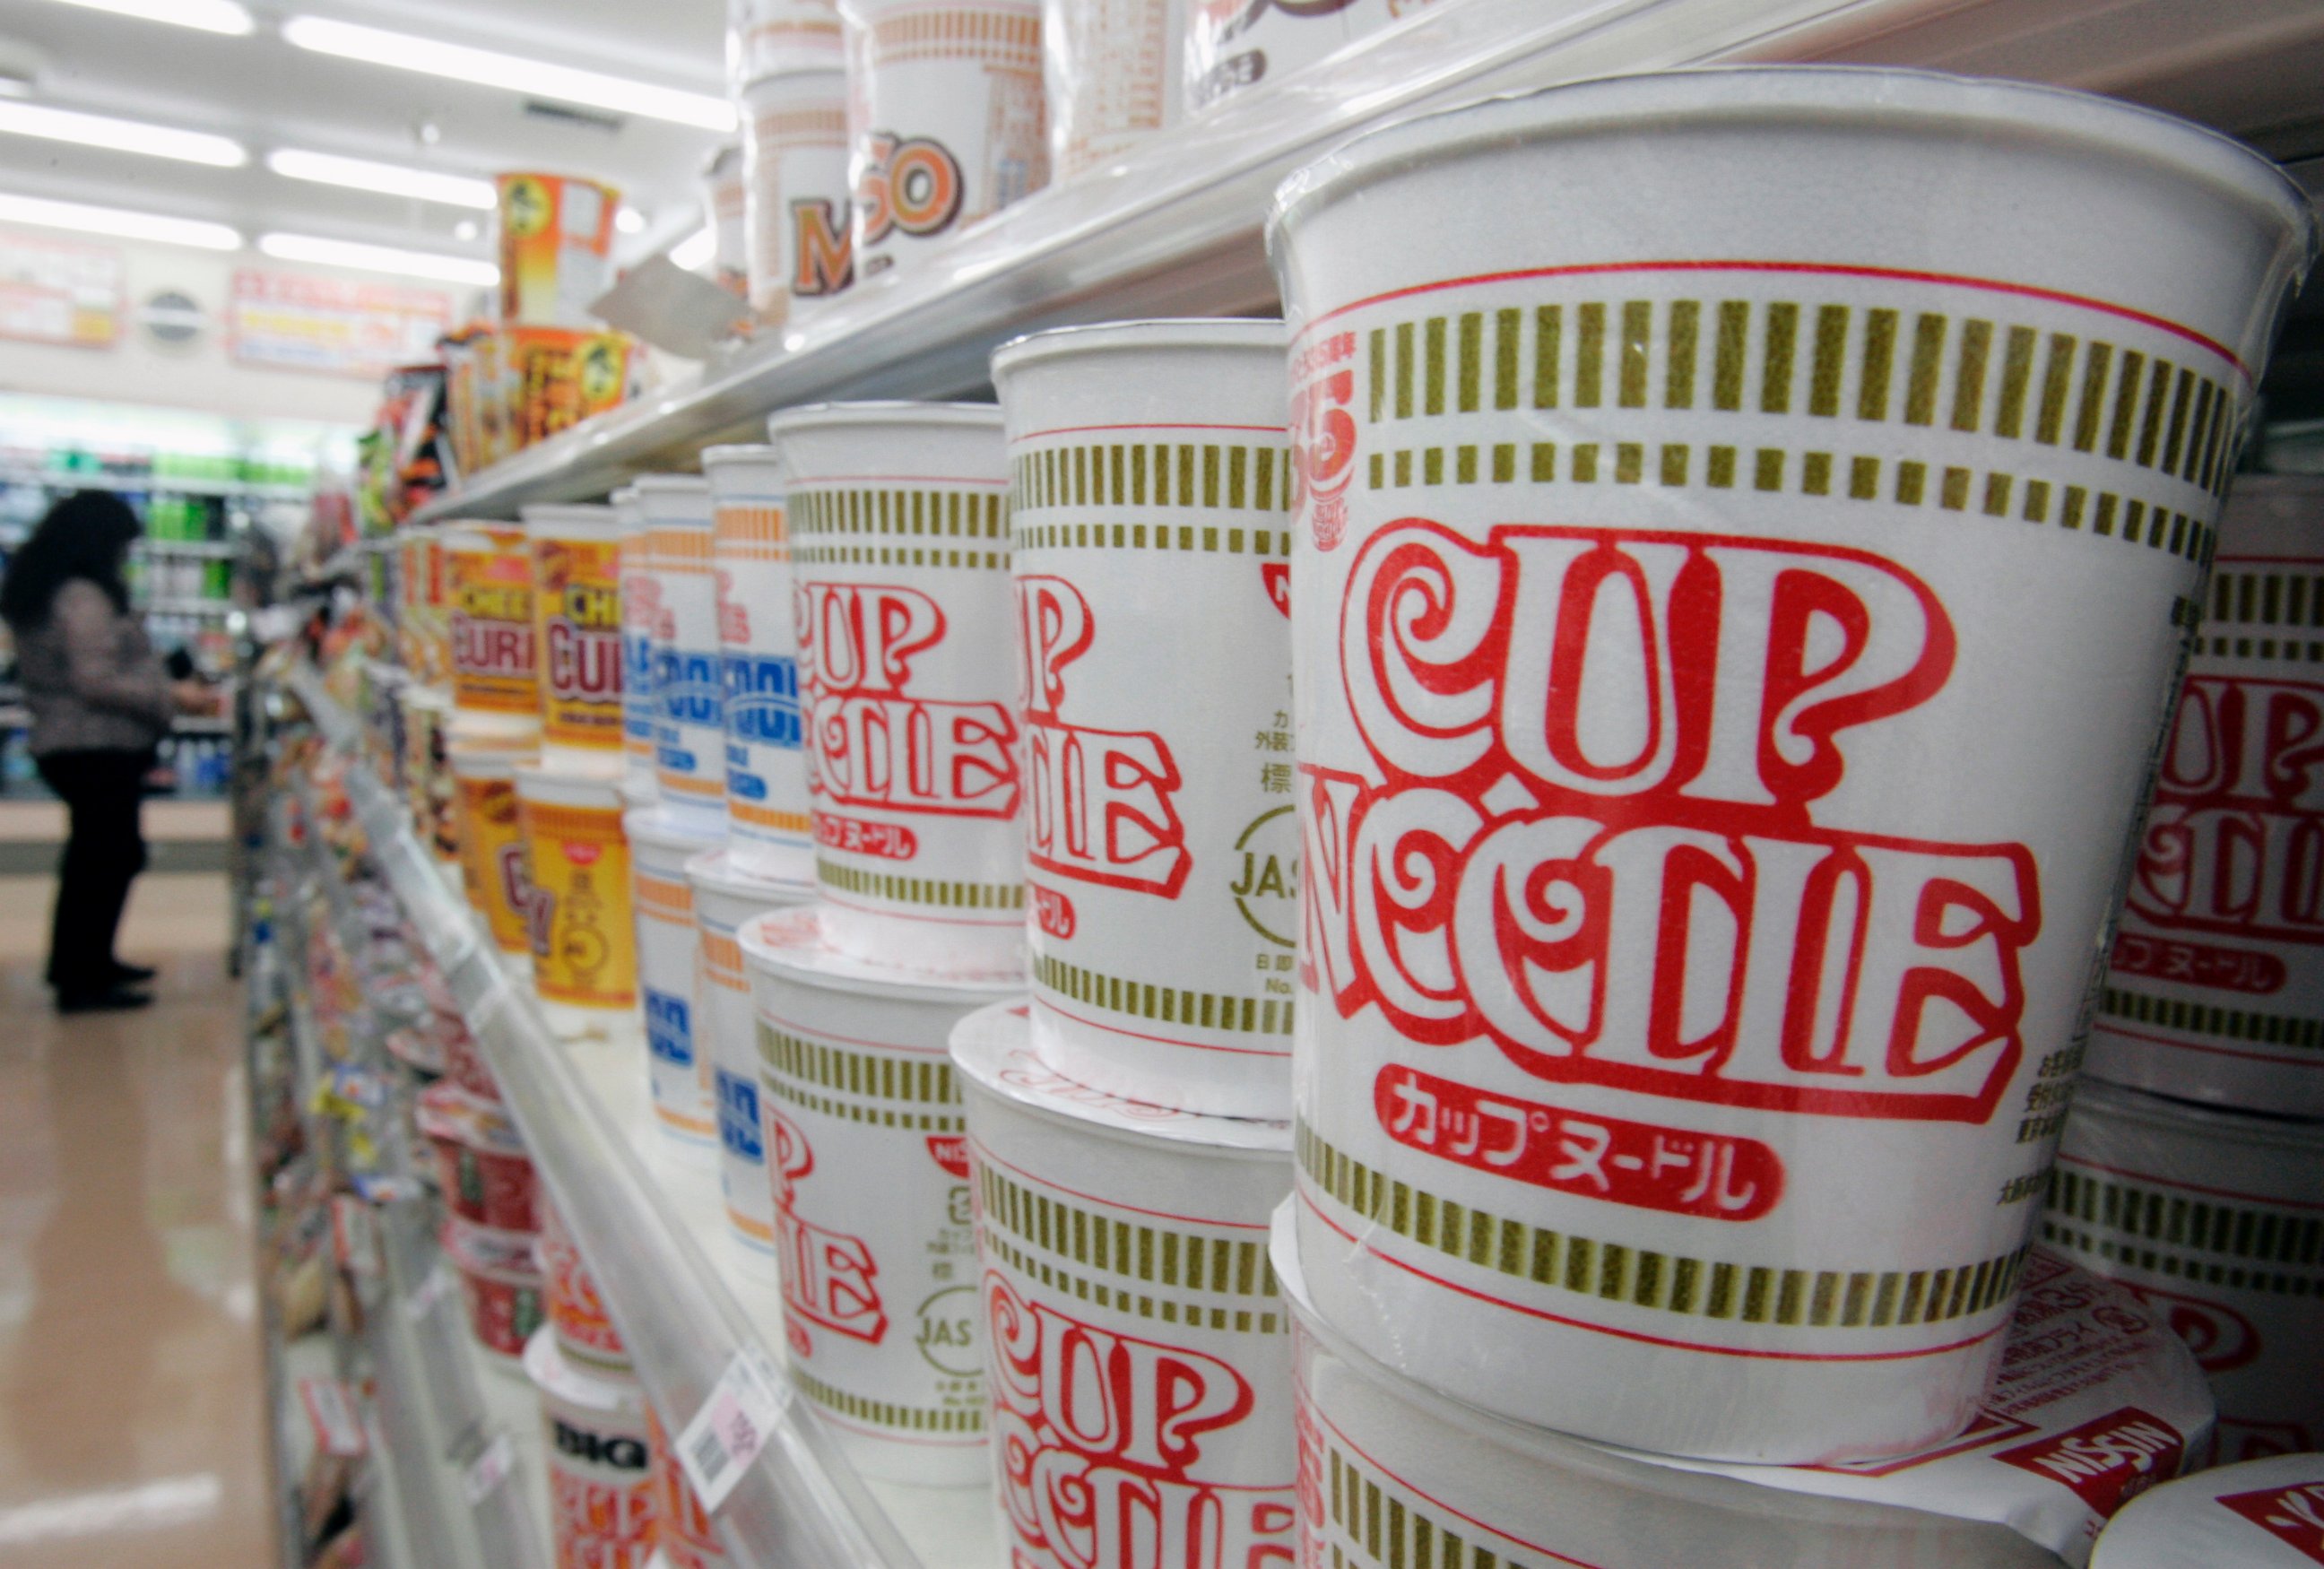 PHOTO: Japanese instant-noodle maker Nissin Food Products' "Cup Noodle" are stacked at a convenience store in Tokyo on Nov. 15, 2006.